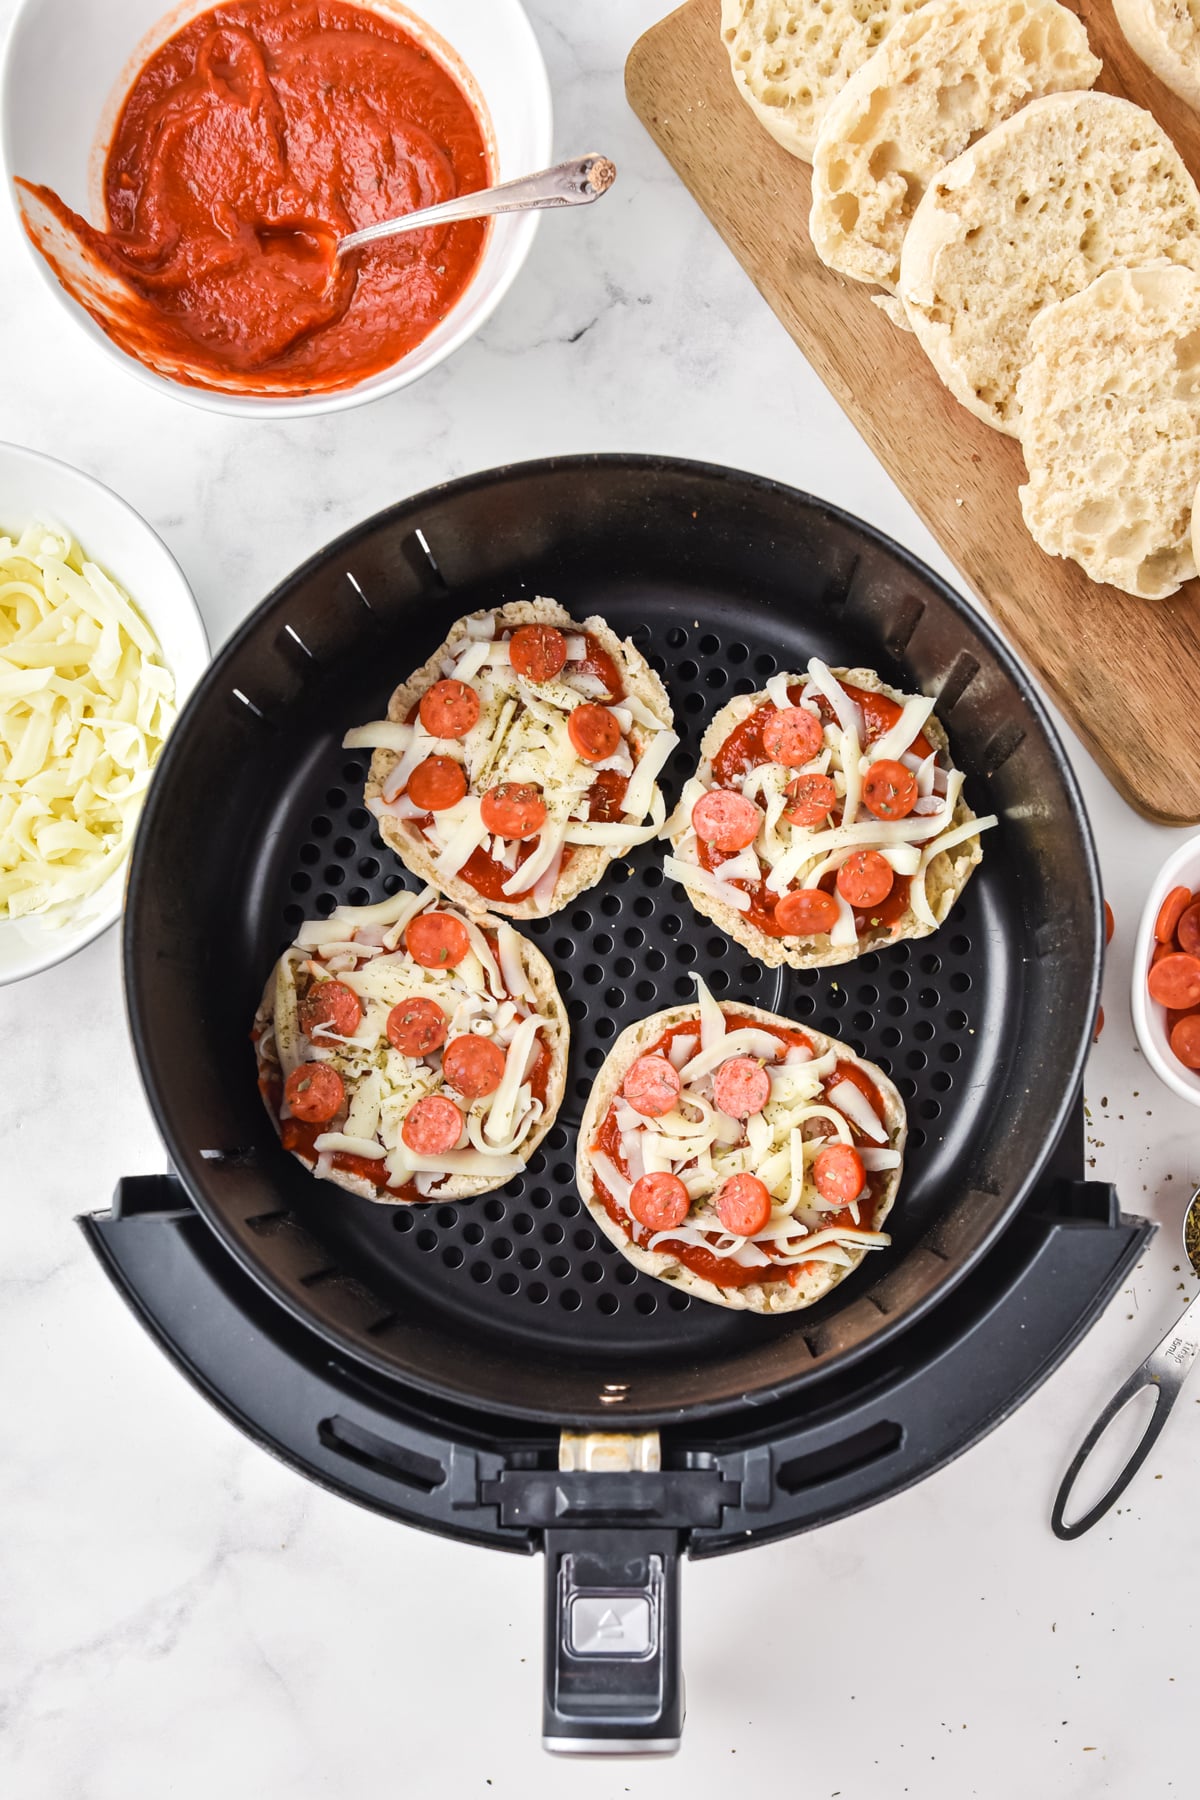 Servings of Air Fryer English Muffin Pizzas ready for cooking